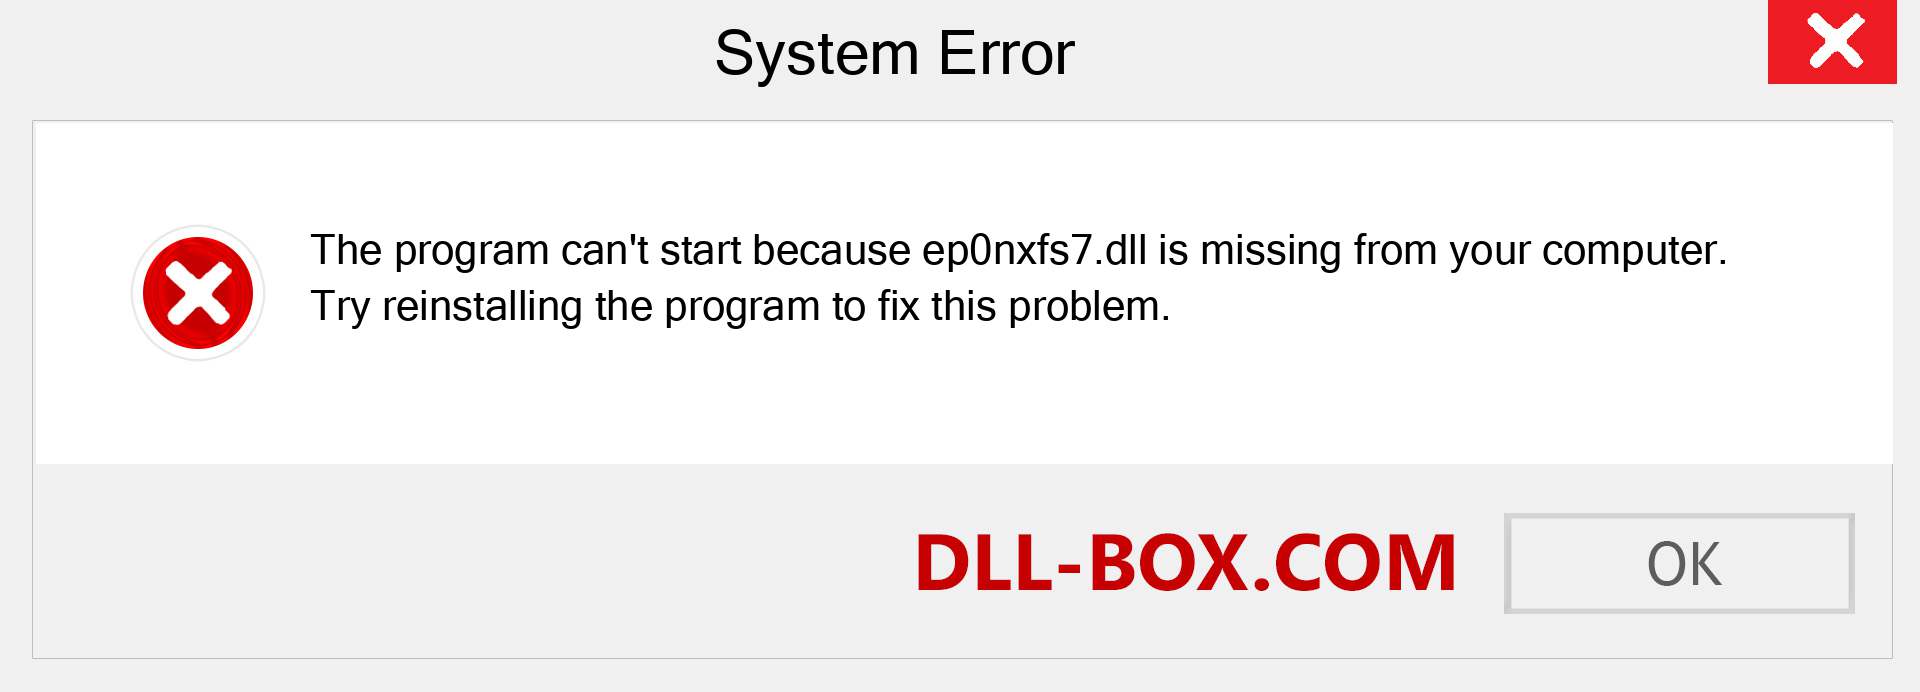  ep0nxfs7.dll file is missing?. Download for Windows 7, 8, 10 - Fix  ep0nxfs7 dll Missing Error on Windows, photos, images